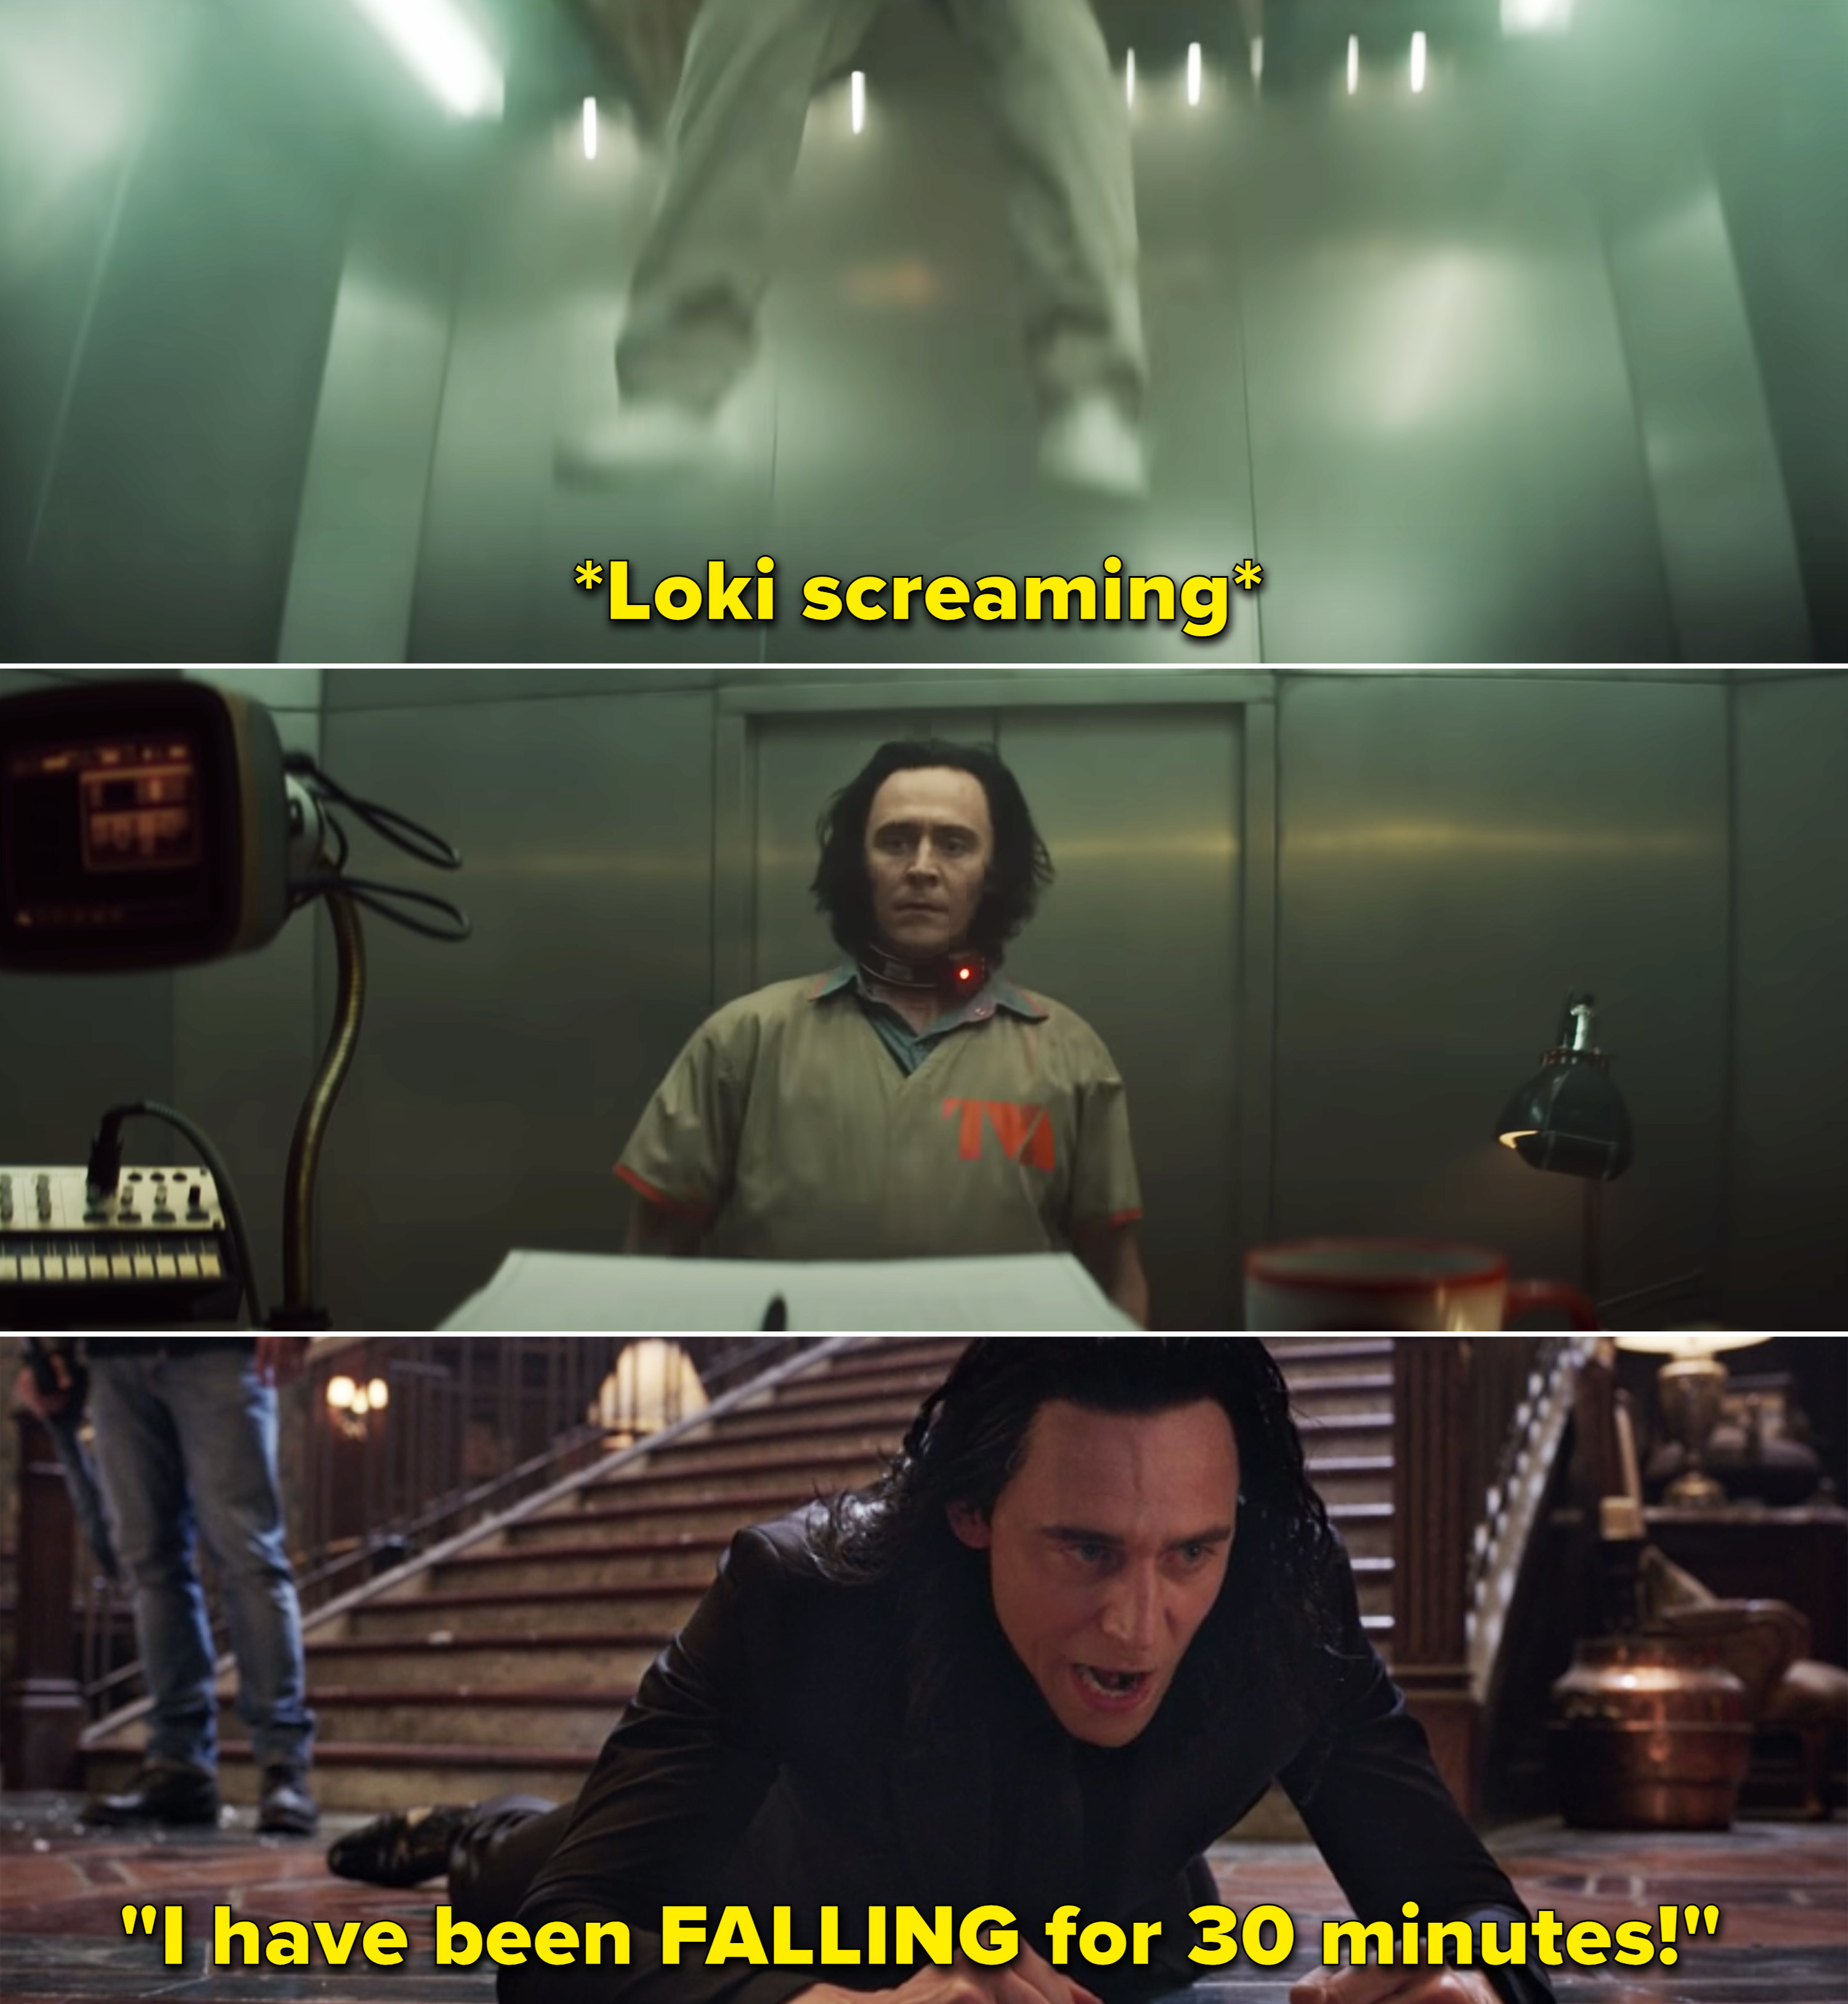 Loki screaming vs. Loki saying, &quot;I have been falling for 30 minutes&quot;